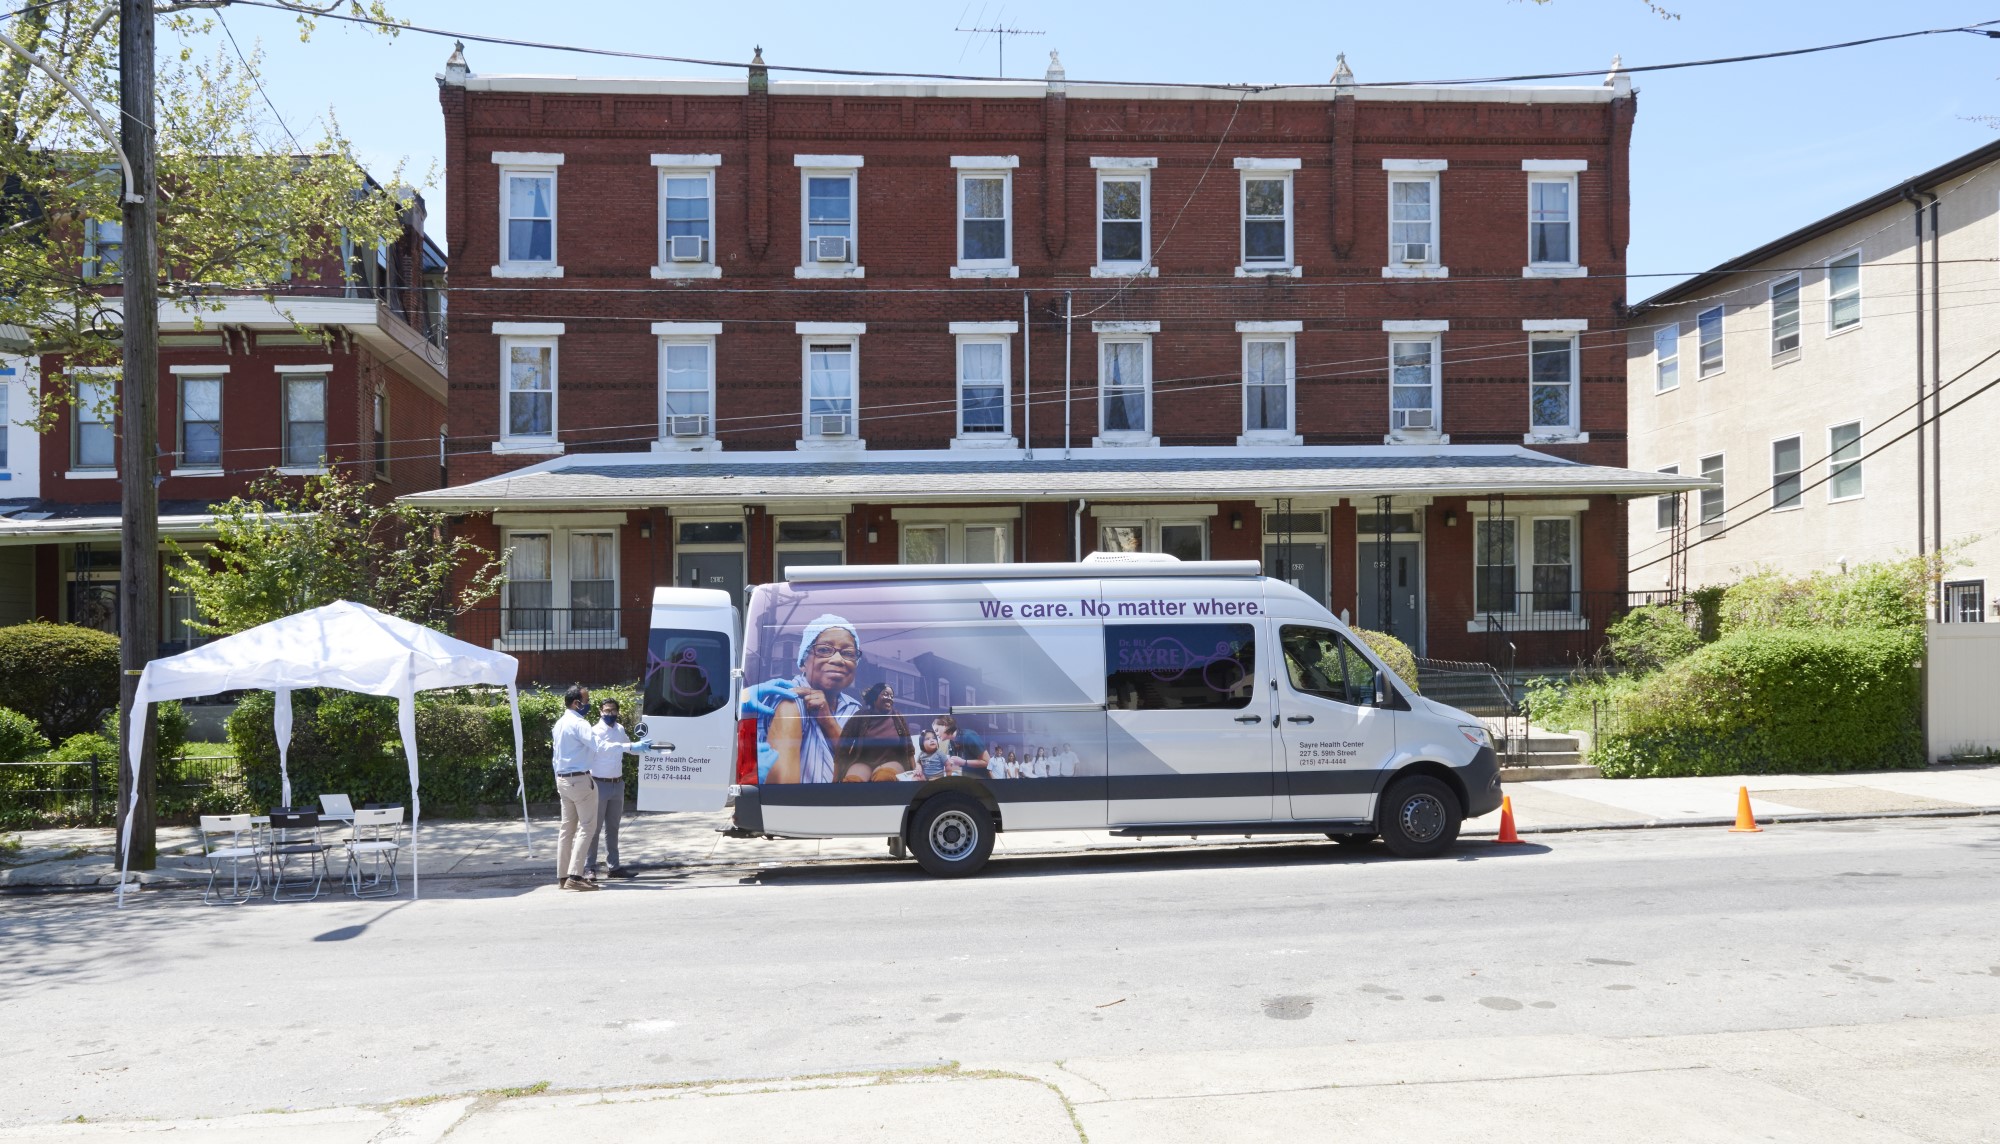 Sayrue Mobile Clinic parked in front of homes